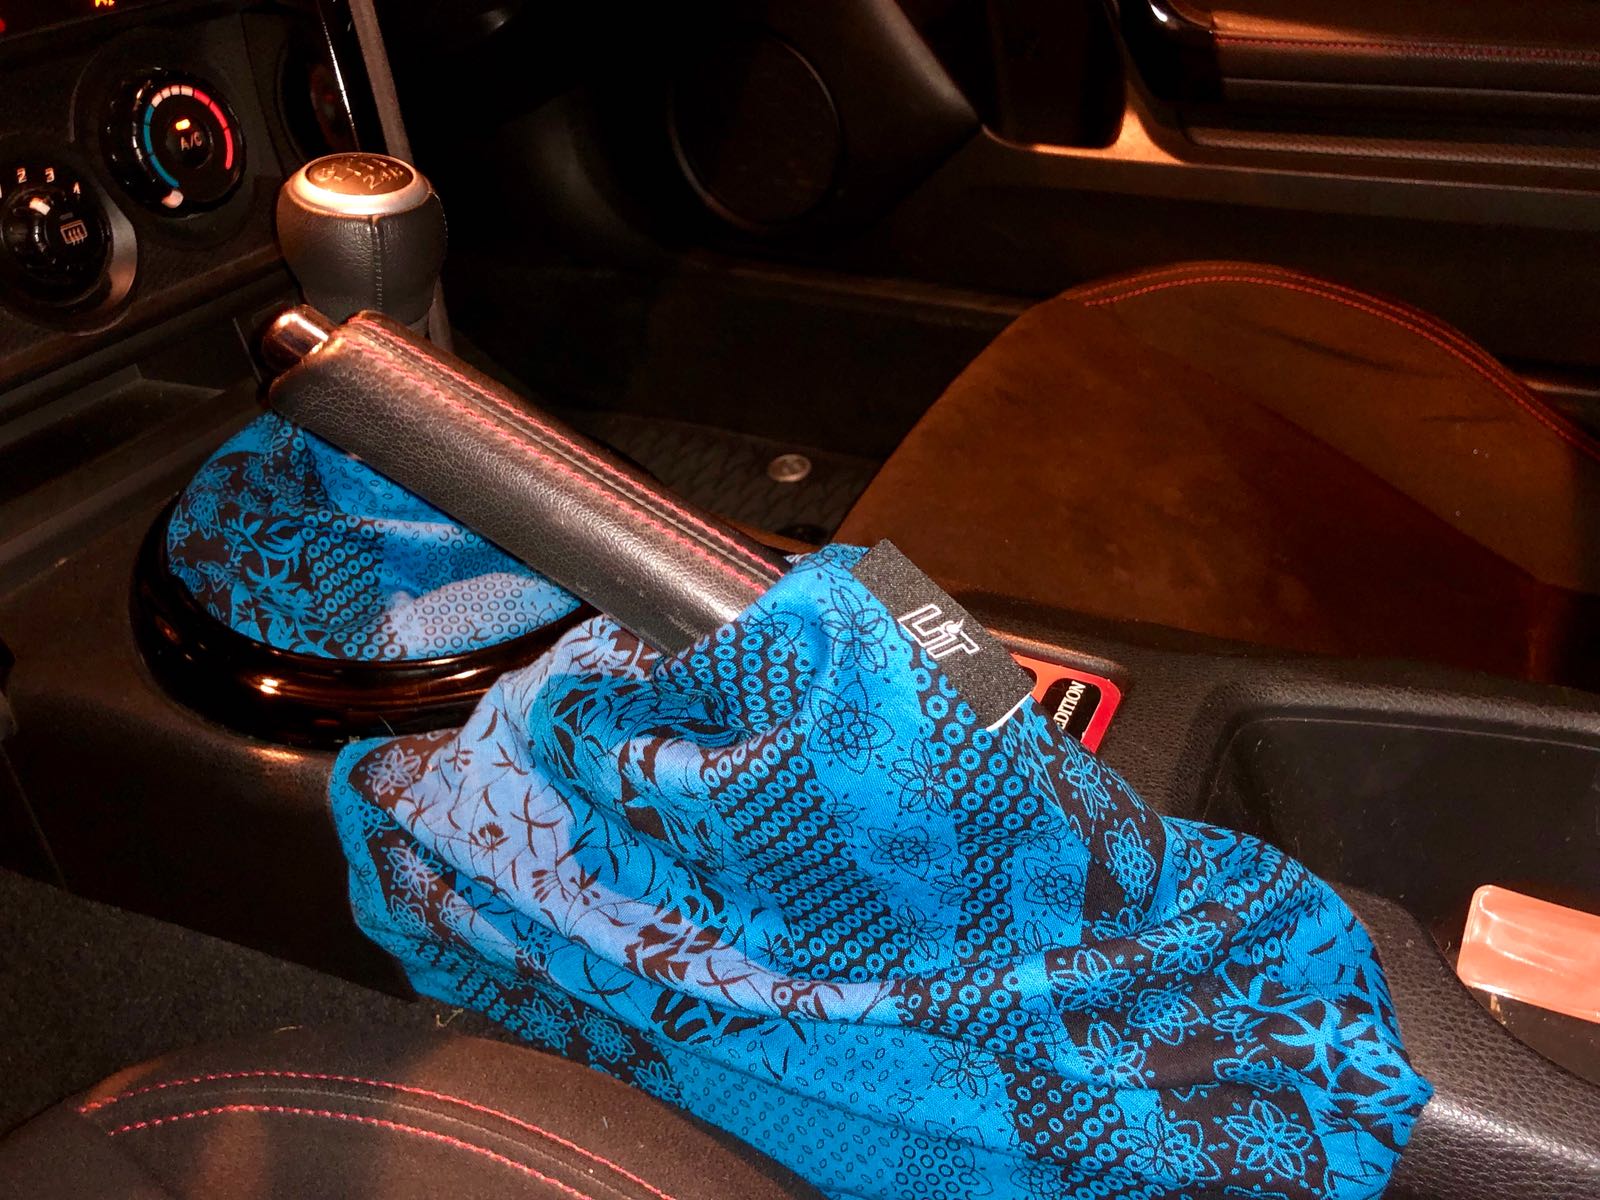 cars shift boot cover , nissan shift boot cover , subaru shift boot cover , toyota shift boot cover , schassis shift boot cover , nissan z shift boot cover , skyline shift boot cover , ford shift boot cover